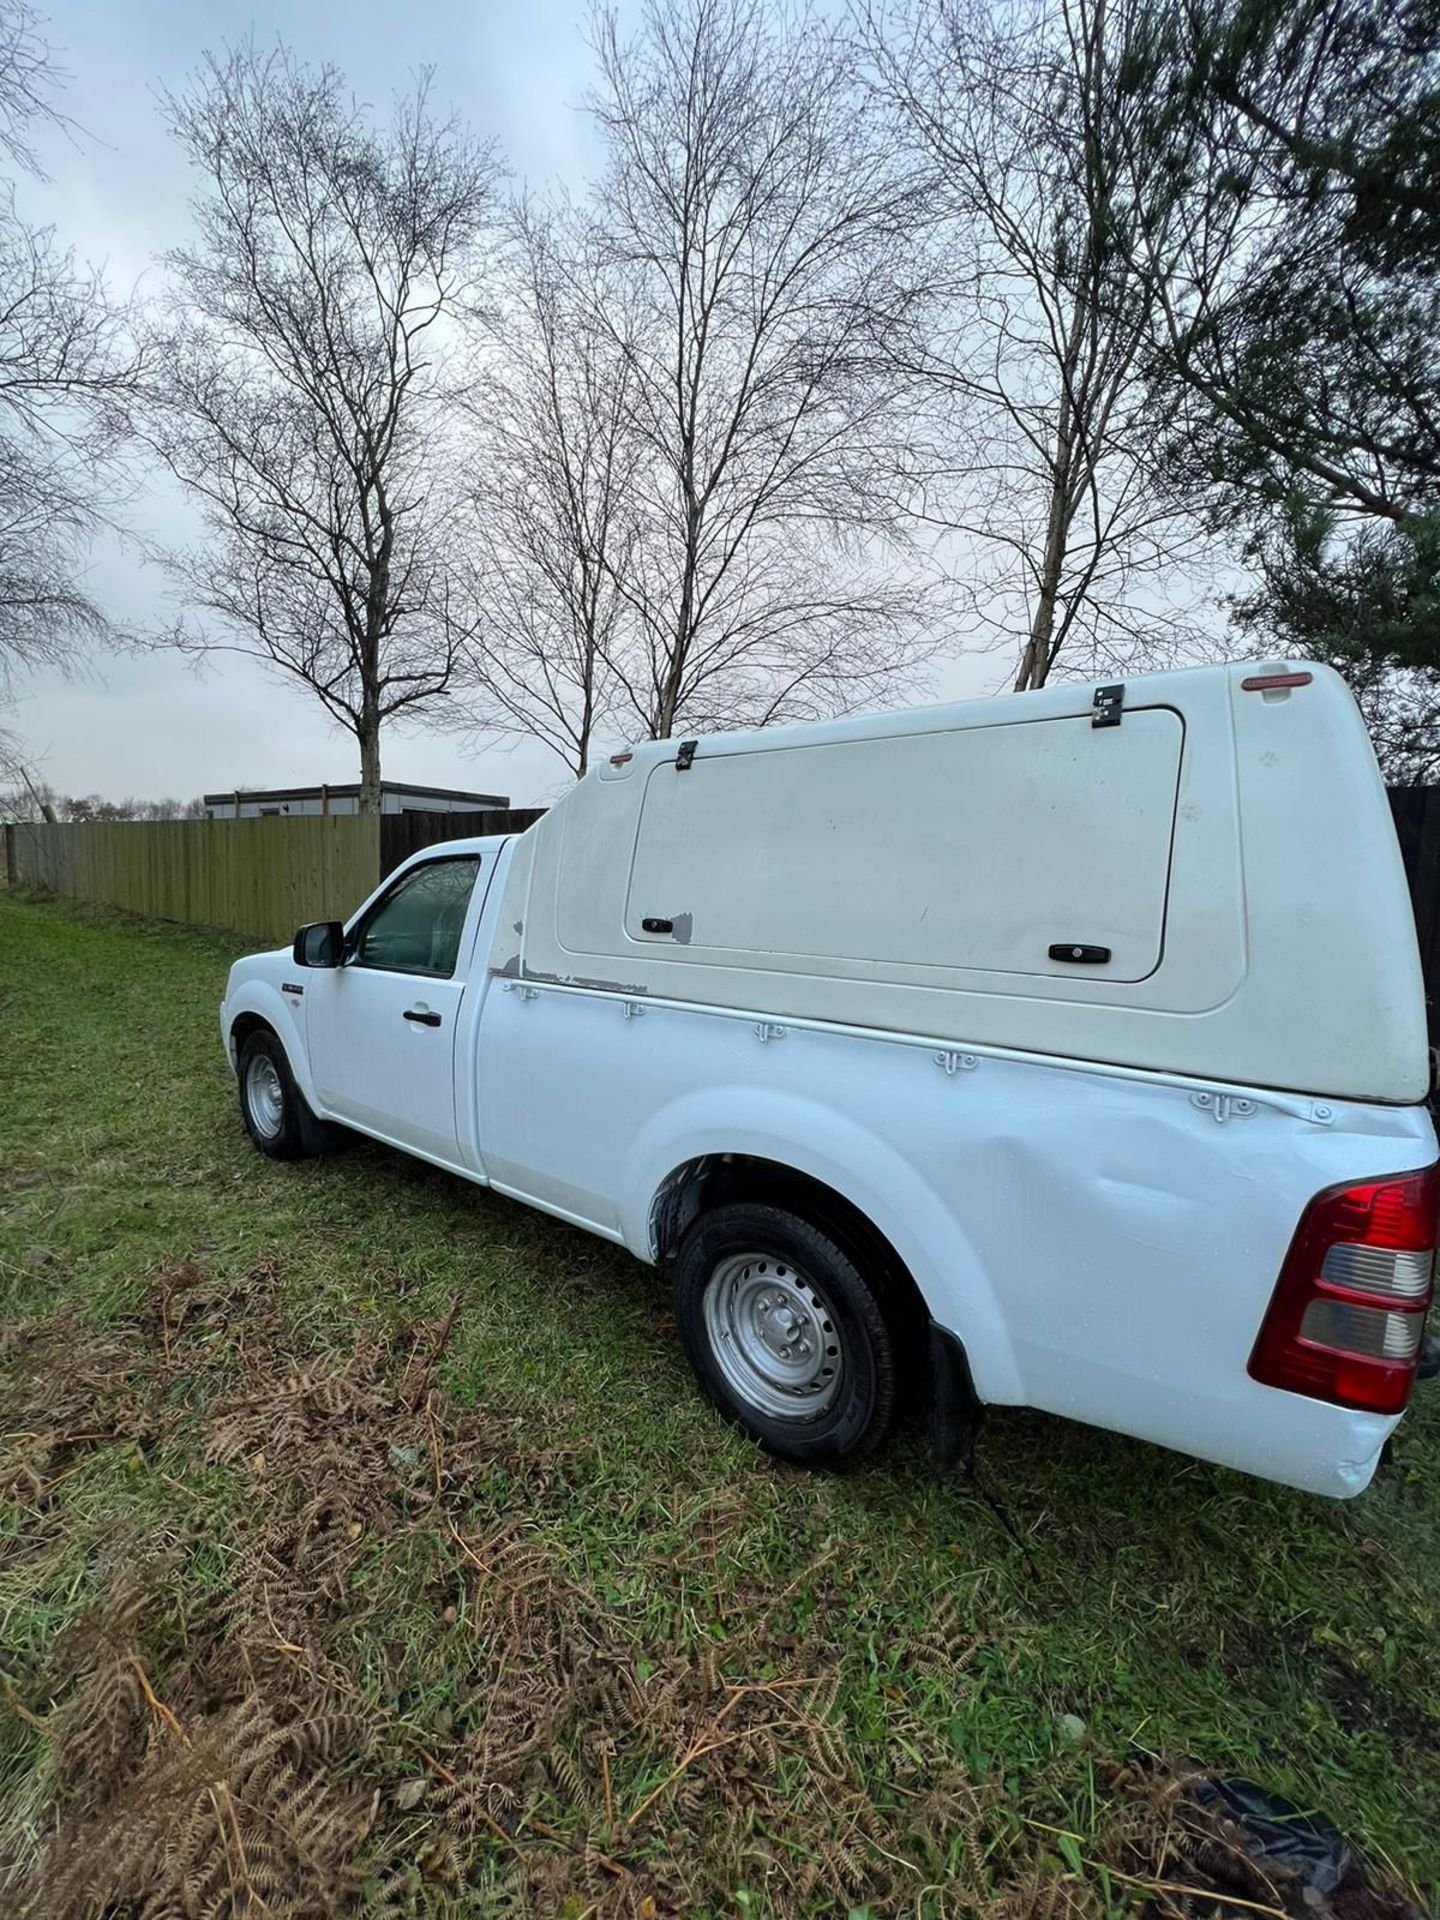 FORD RANGER SINGLE CAB PICKUP TRUCK 2WD EX NHS - Image 10 of 15